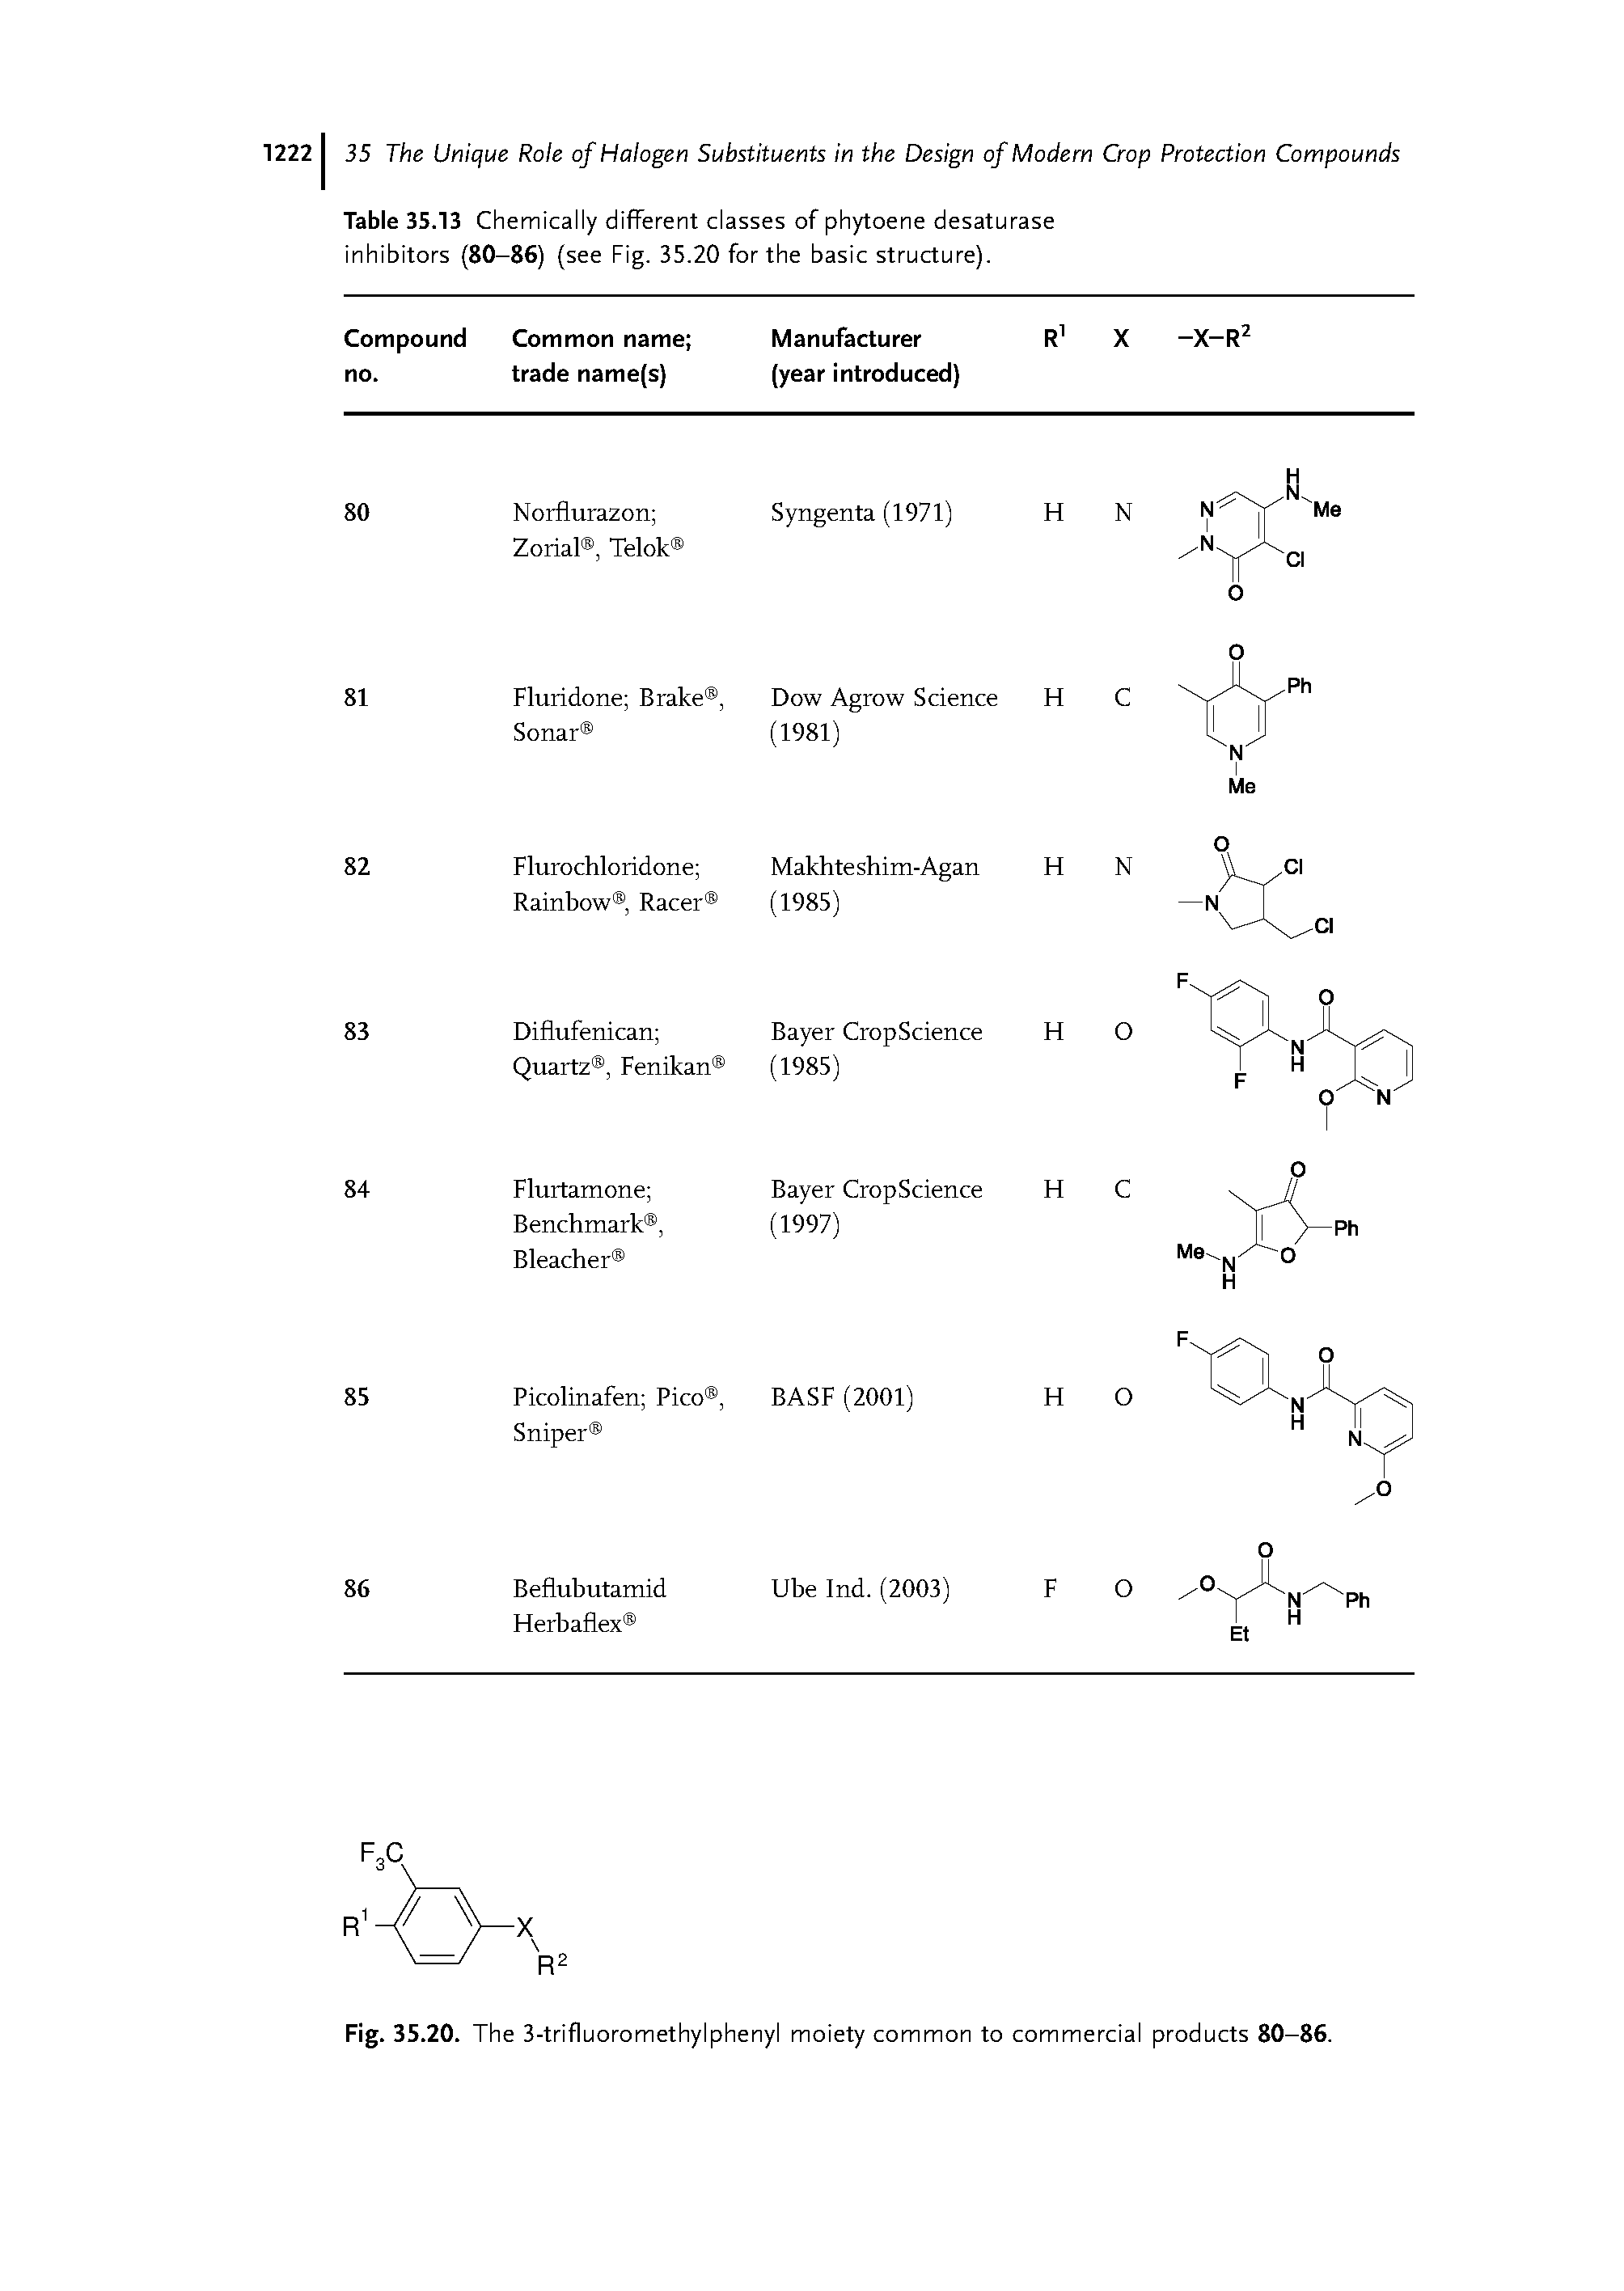 Table 35.13 Chemically different classes of phytoene desaturase inhibitors (80-86) (see Fig. 35.20 for the basic structure).